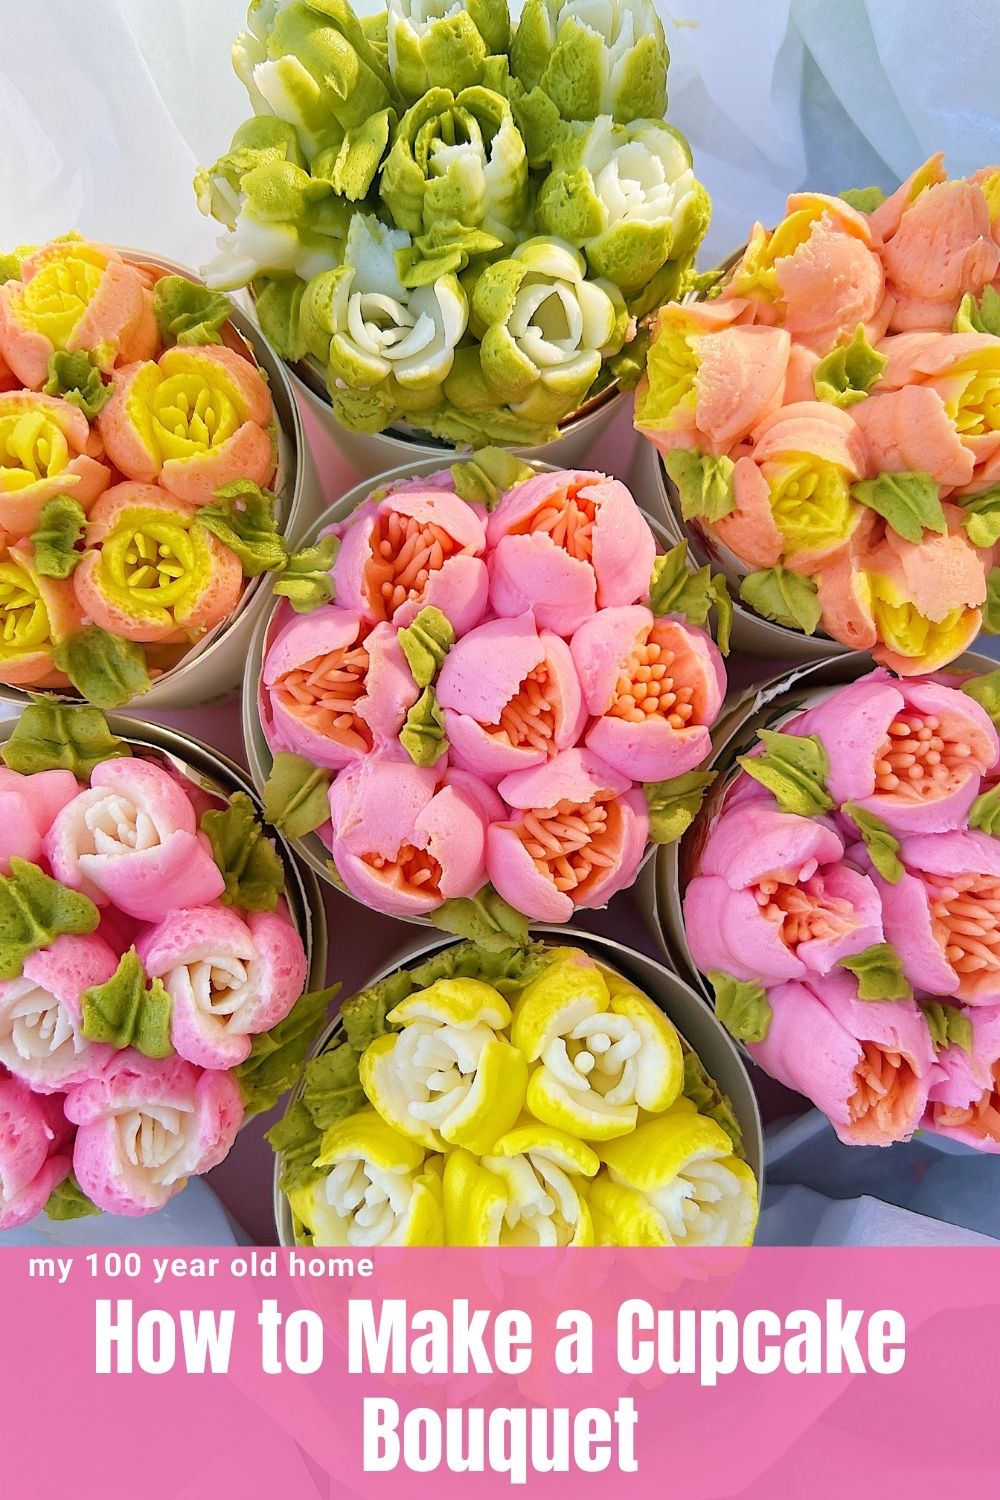 Is there anything more delightful than a bouquet of fresh flowers? Perhaps, if it were a delicious cupcake bouquet instead!